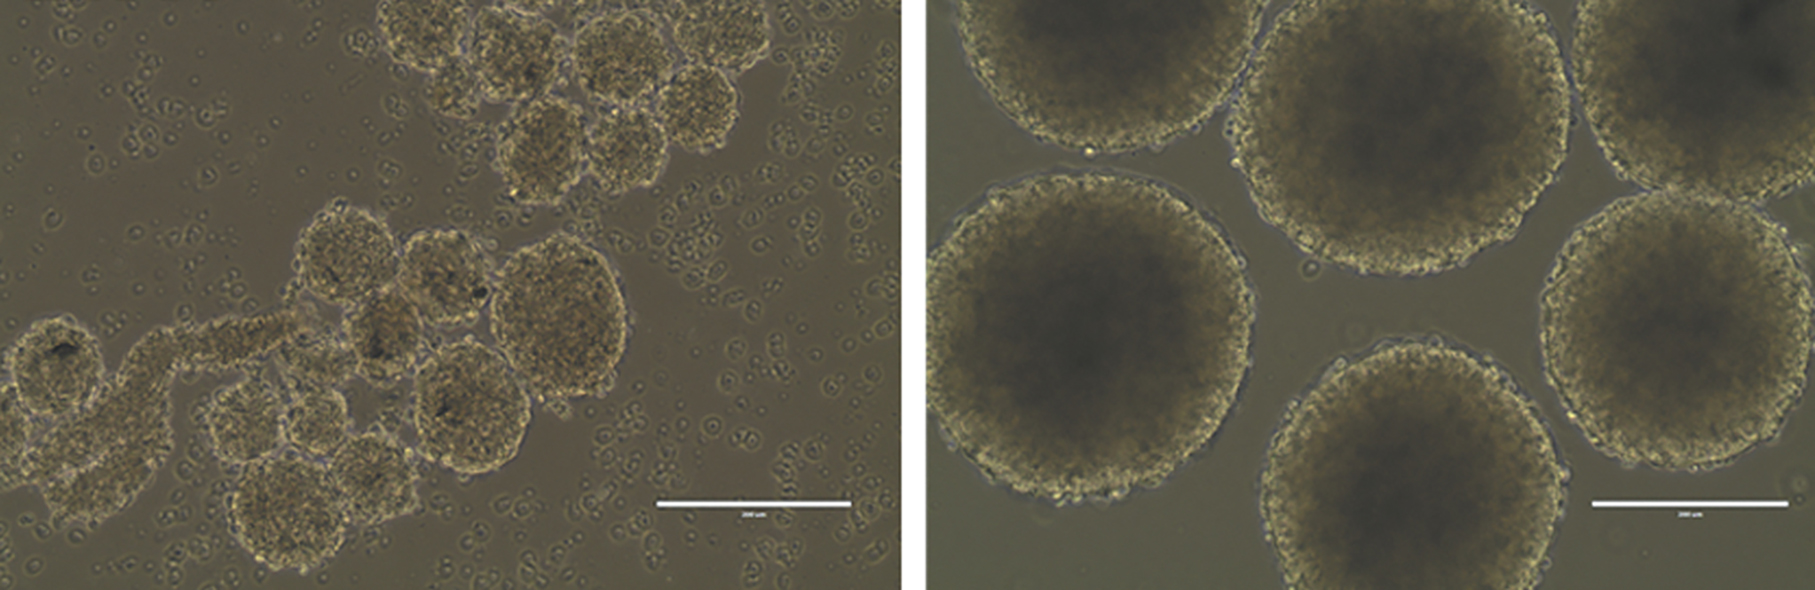 Cell death: Clusters of brain cells grown in culture that have been infected with the Zika virus (left) are much smaller than uninfected spheres (right).